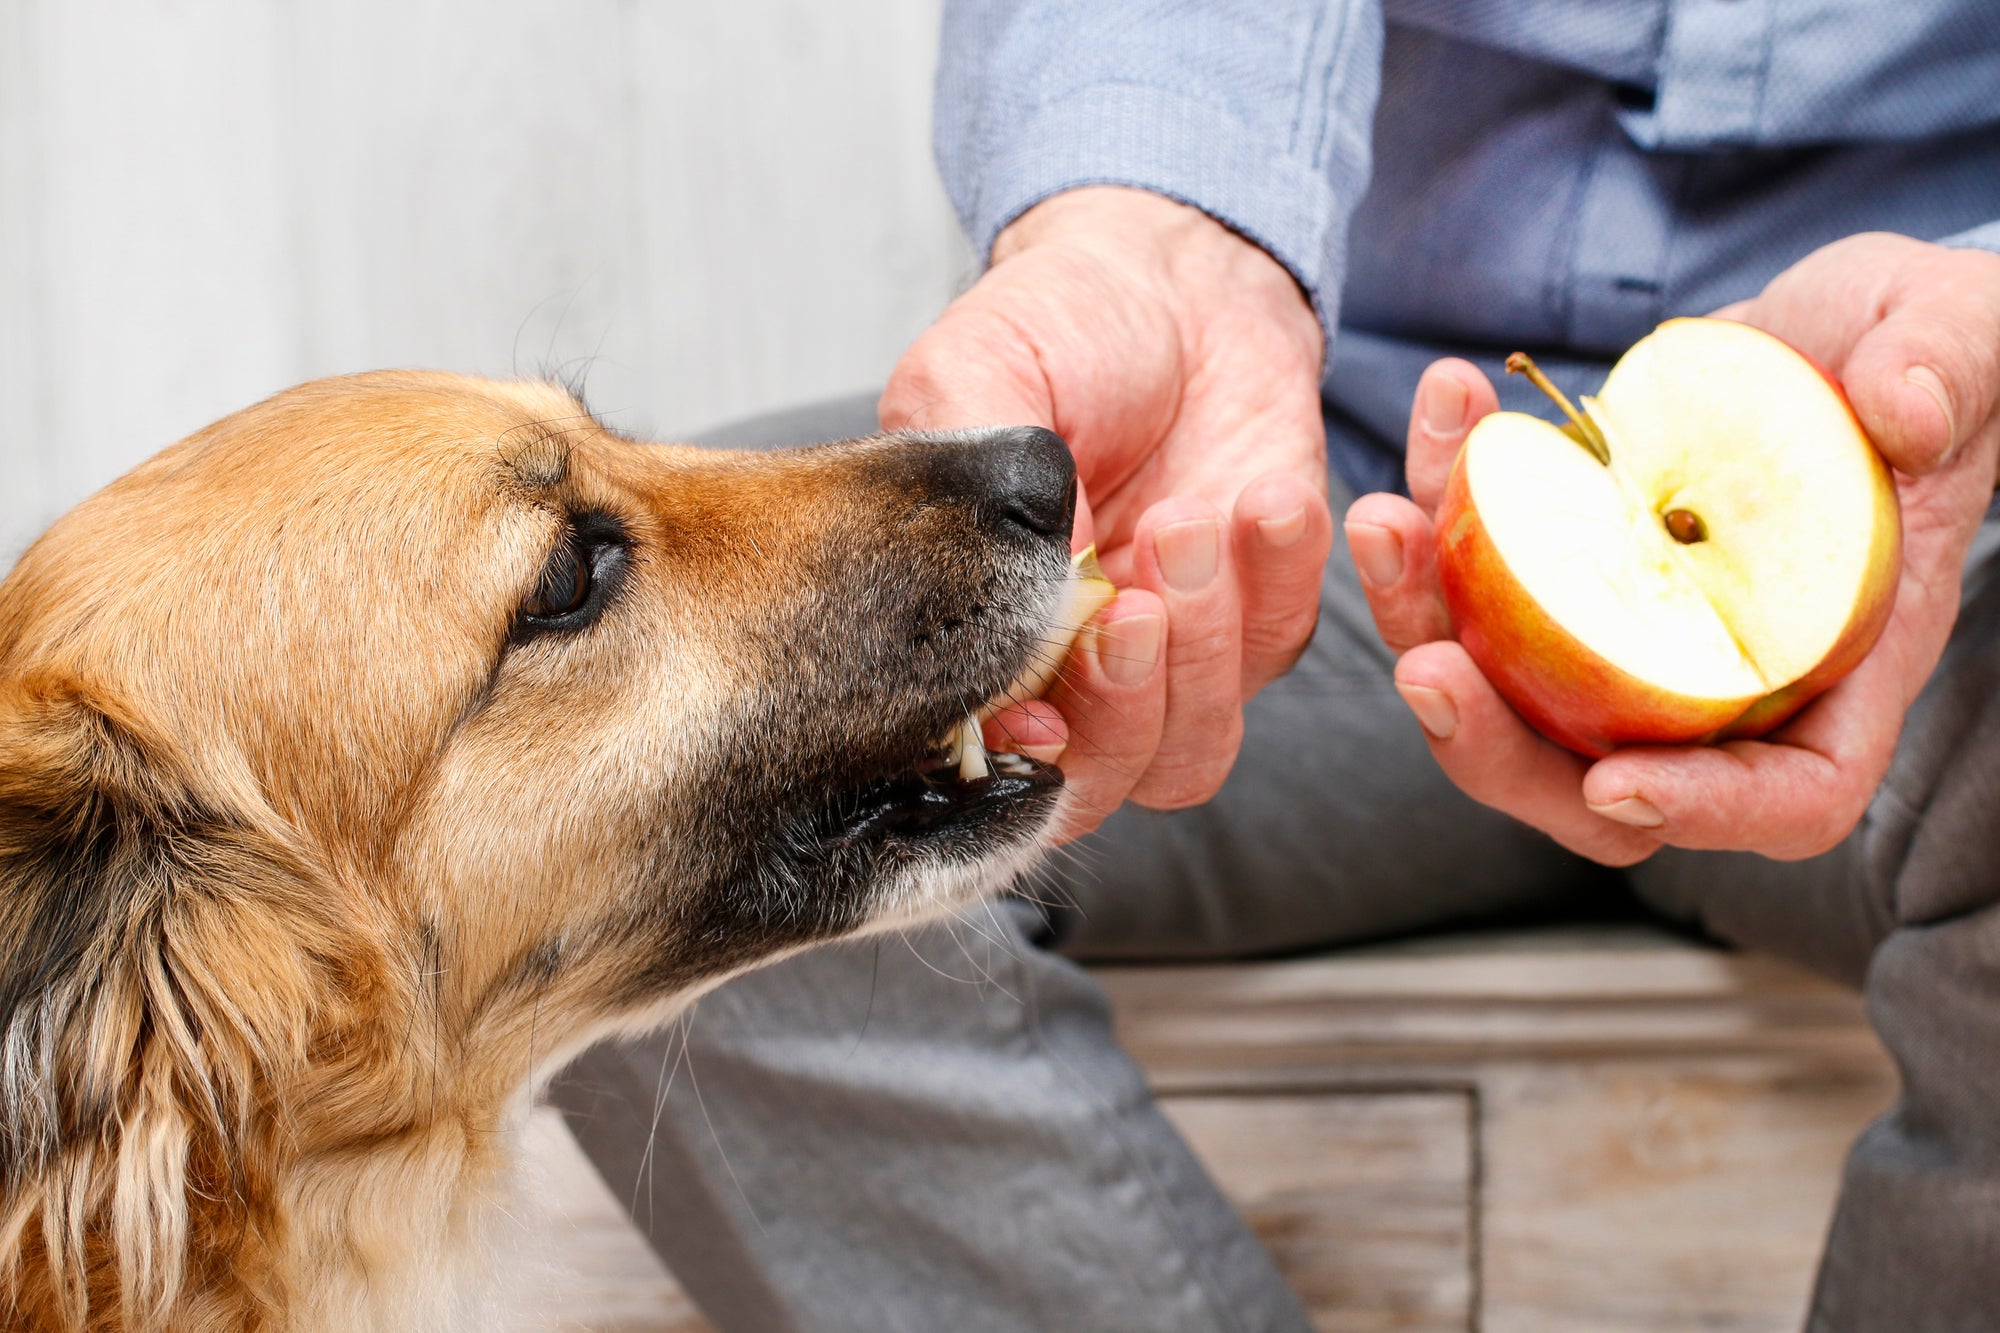 Can Dogs Eat Apples?